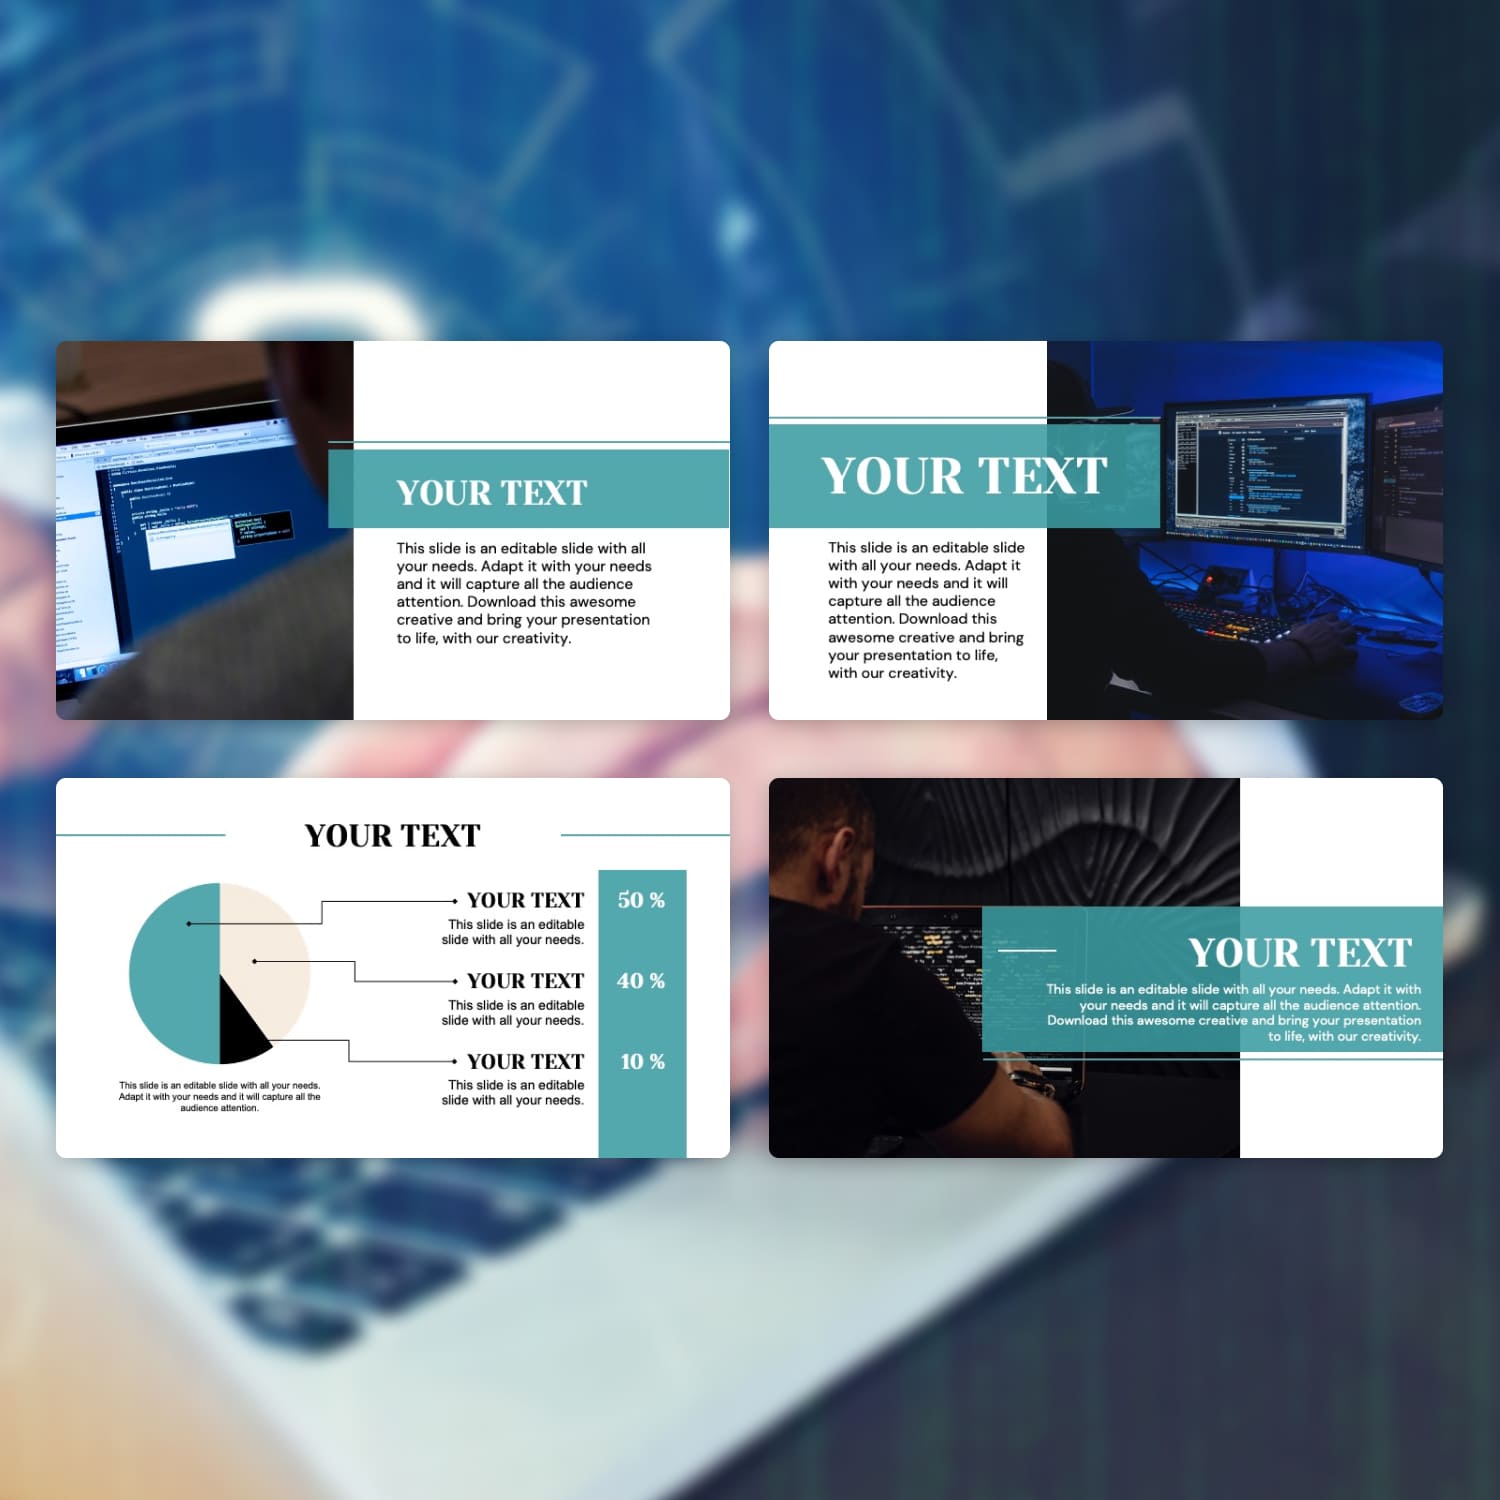 Free cyber security powerpoint template created by MasterbundlesFreebies.